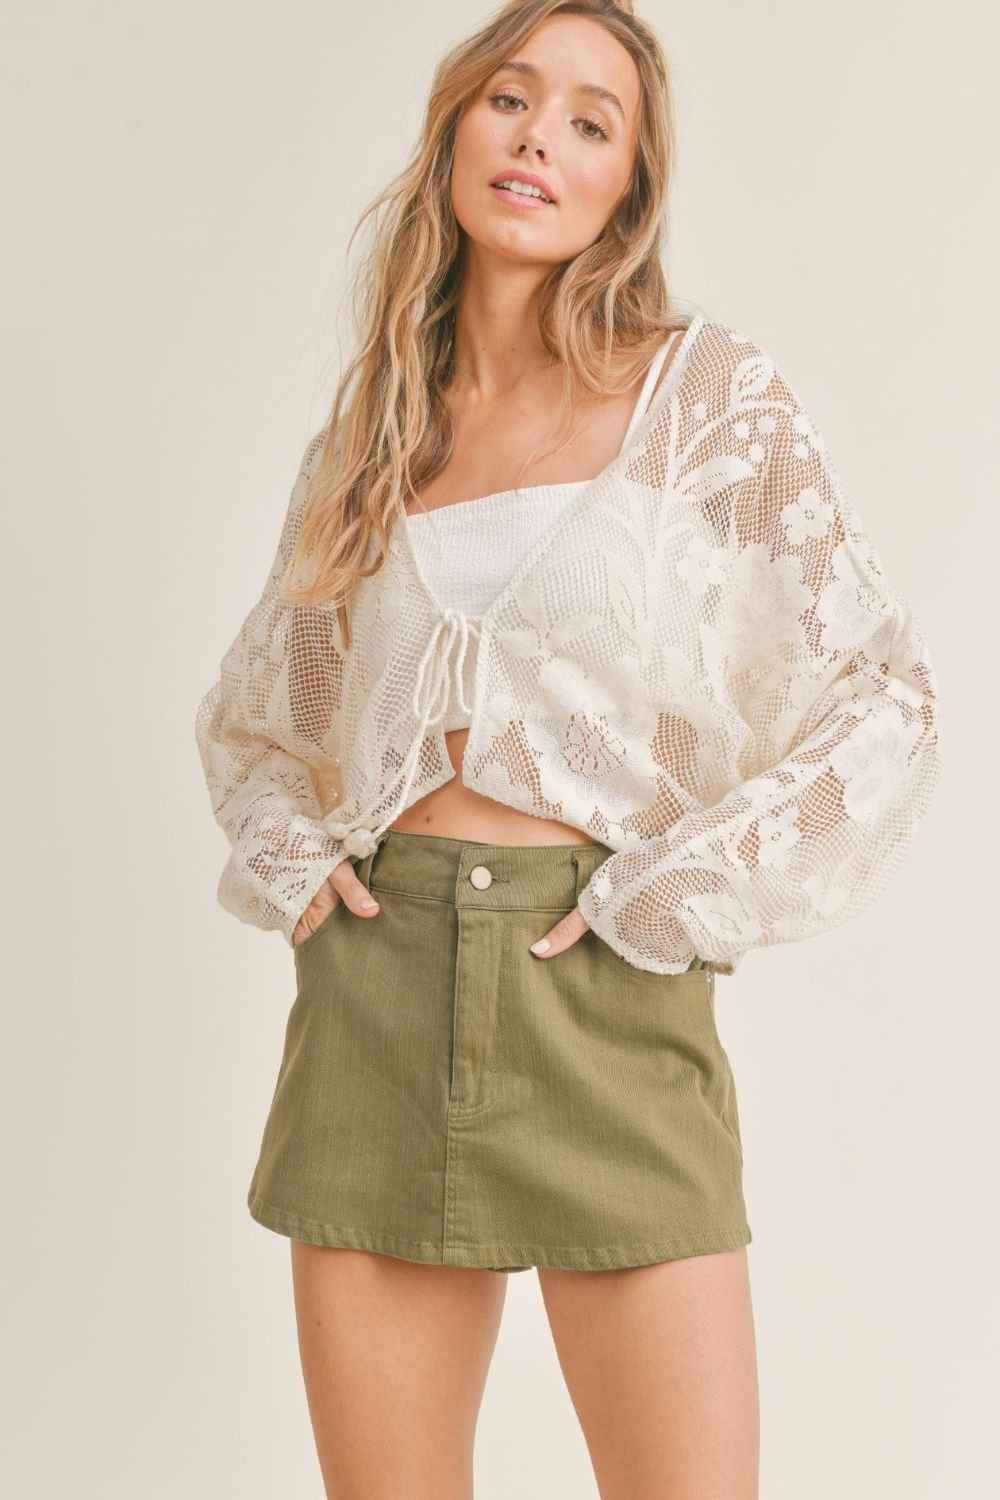 Women's Floral Crochet Lace Cardigan | Sadie & Sage | Cream - Women's Shirts & Tops - Blooming Daily